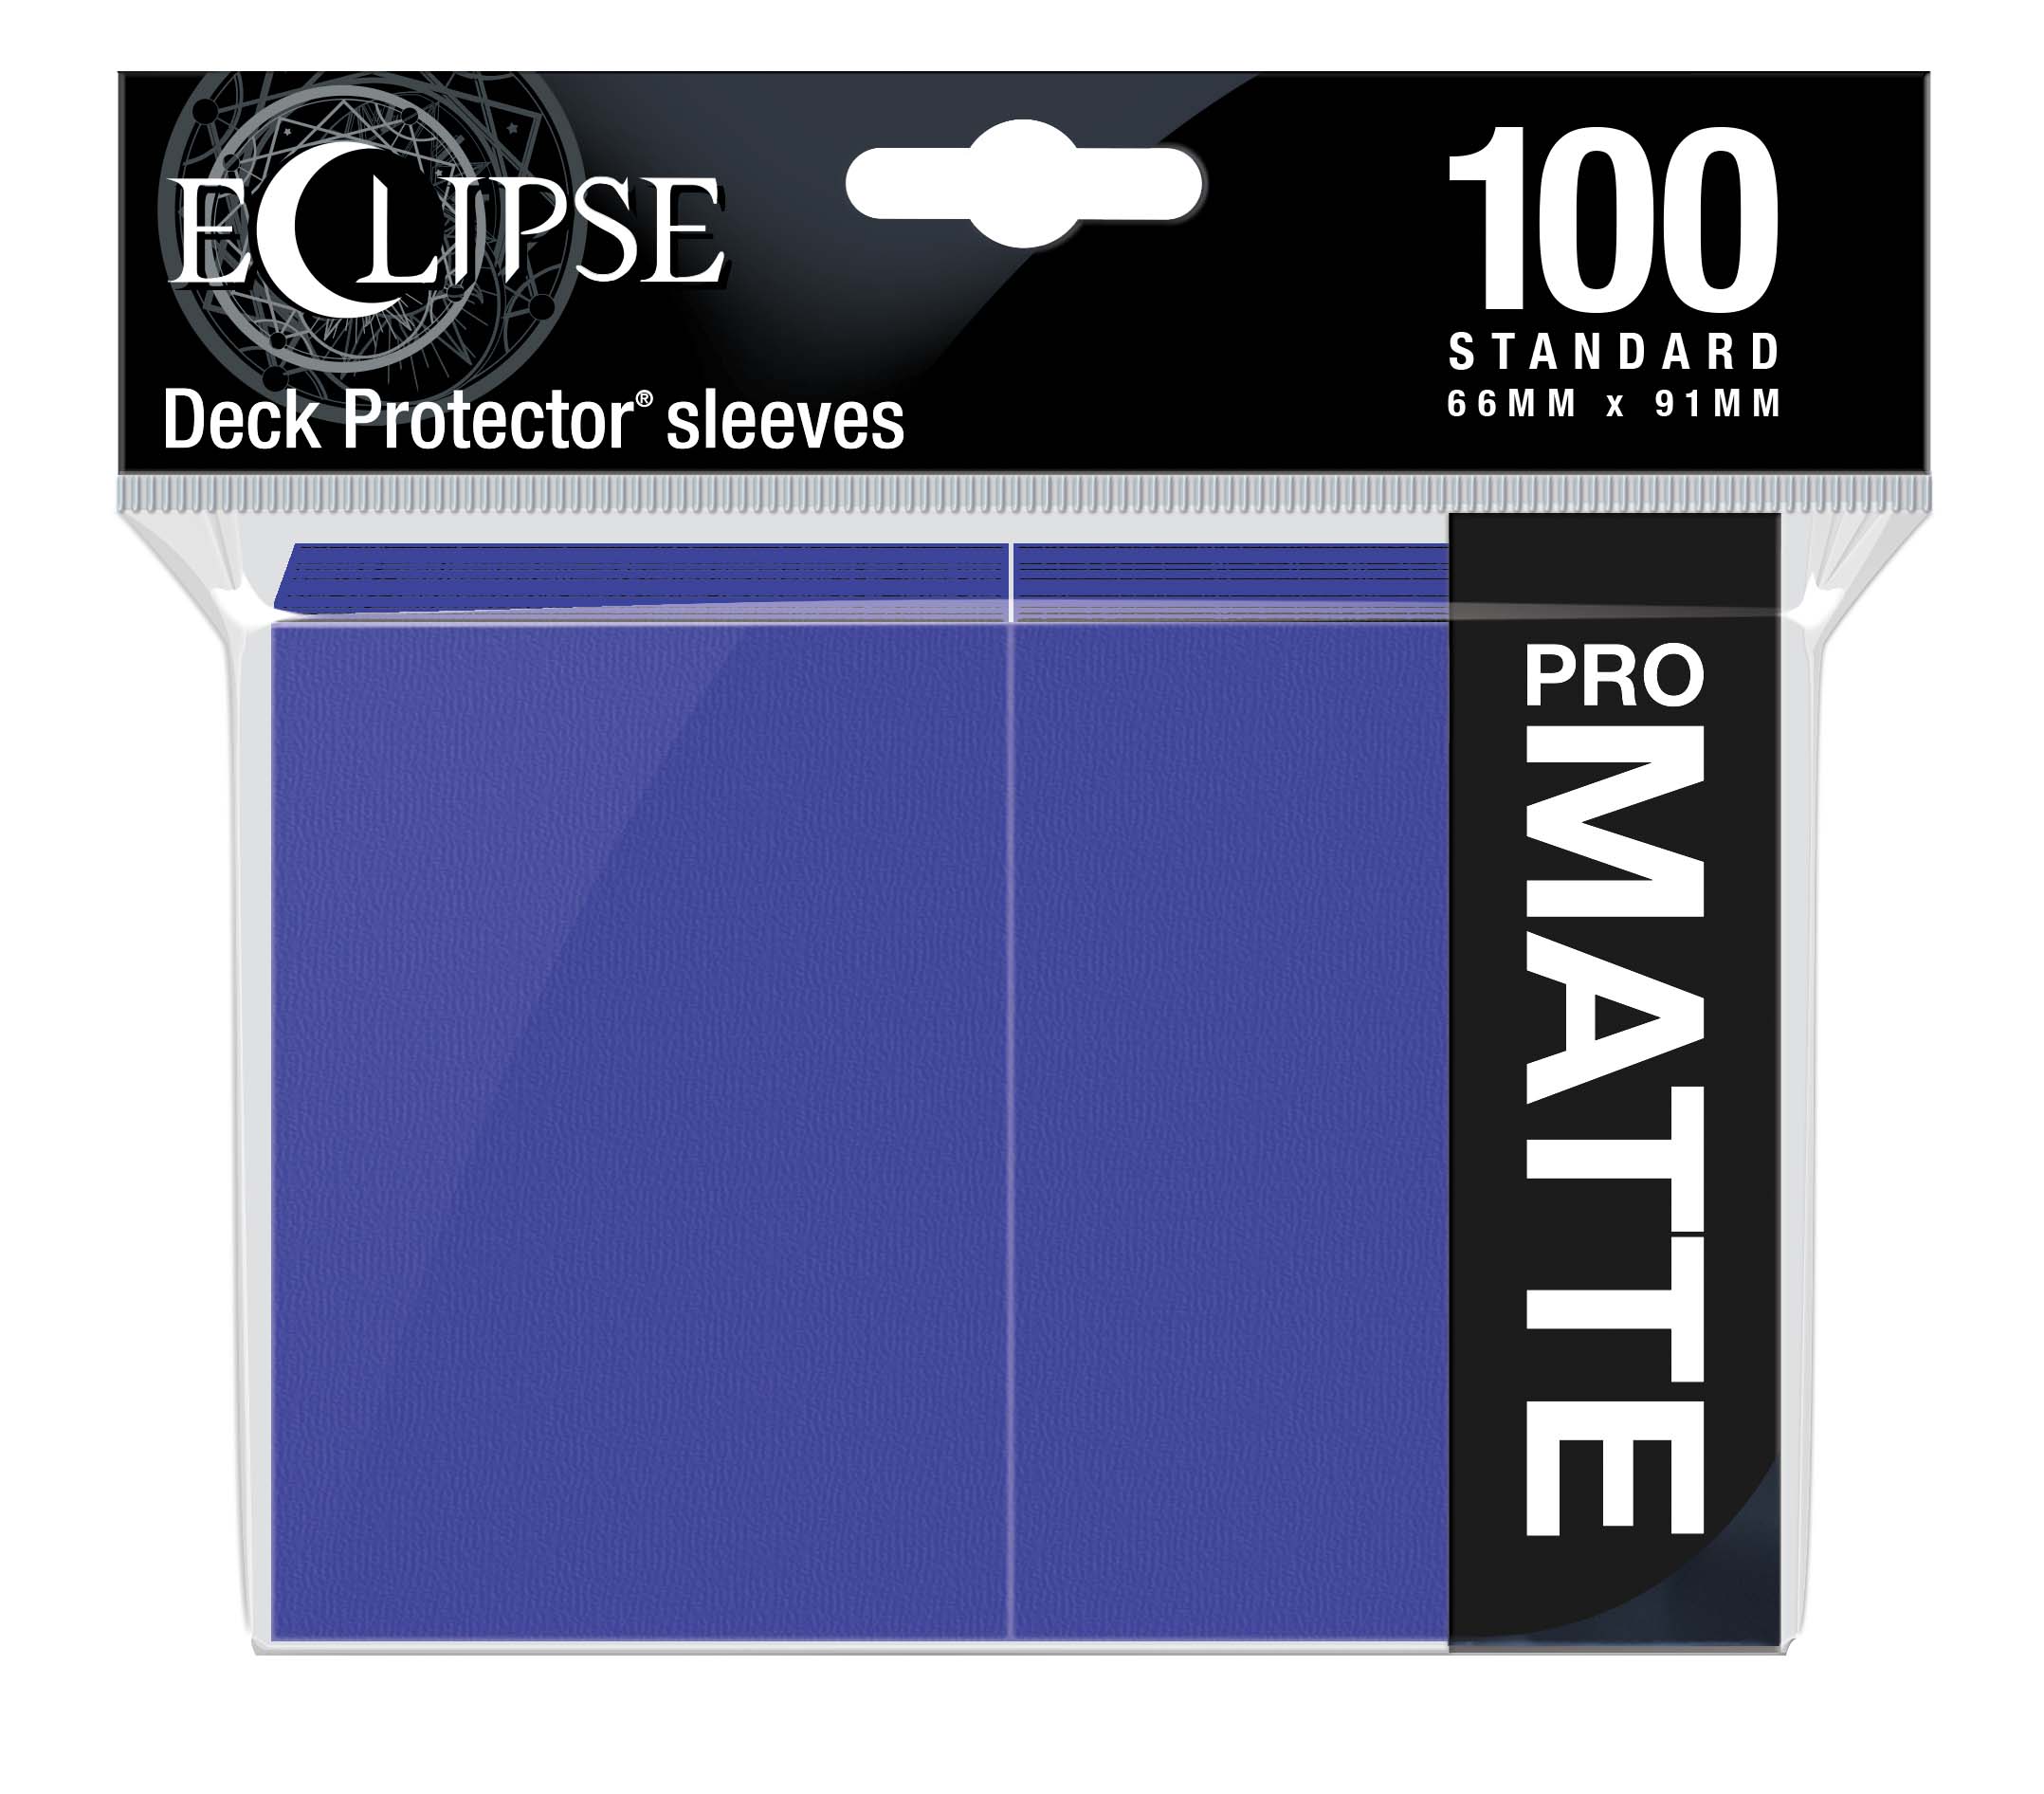 Ultra Pro: Eclipse Matte Standard Sleeves (100 count ) - Royal Purple